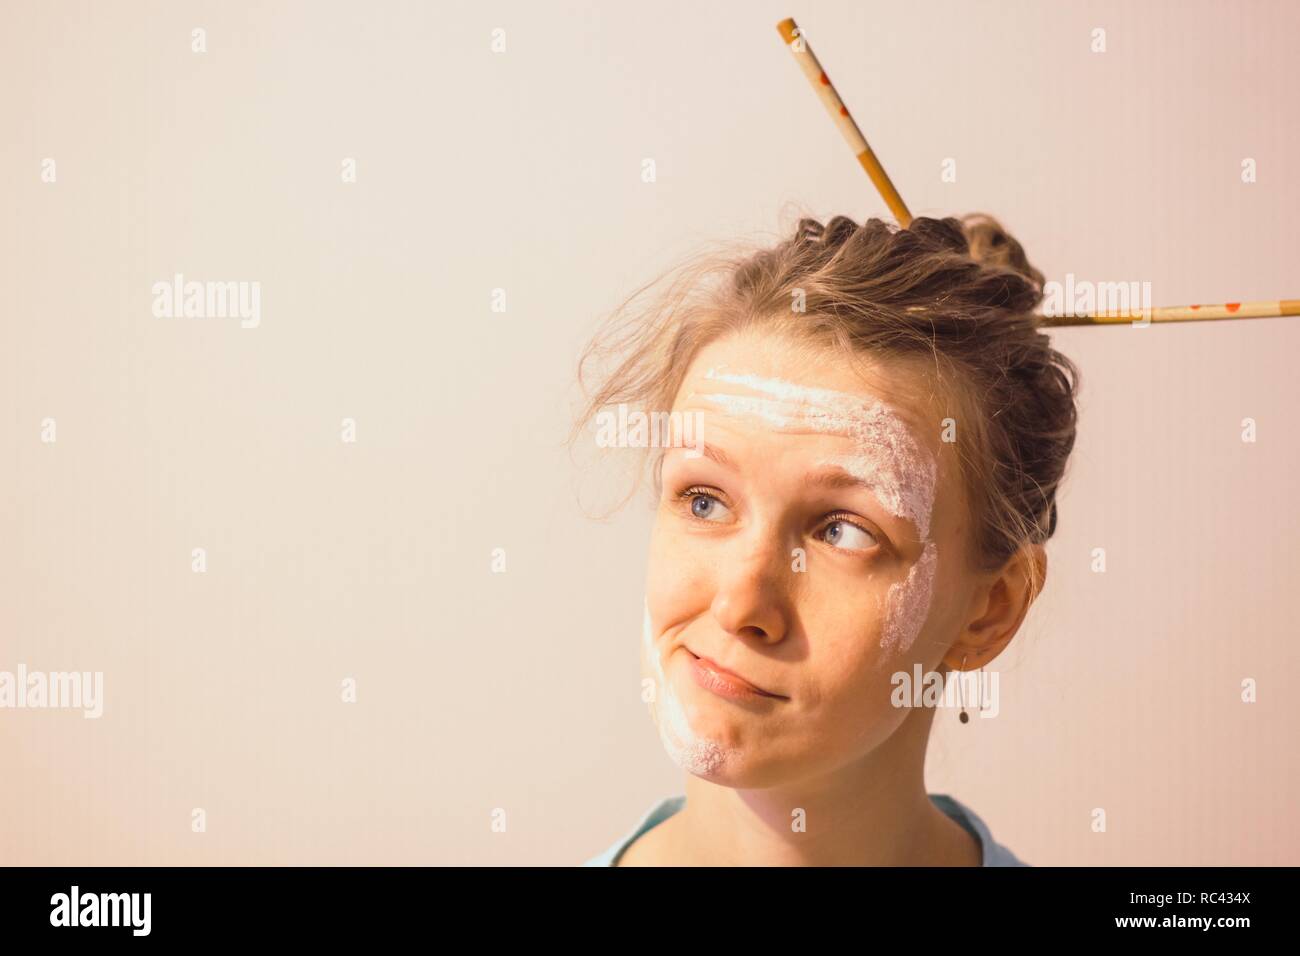 Girl with a soiled face flour and chopsticks in her hair on a white background. Girl with astonished look of face. Stock Photo